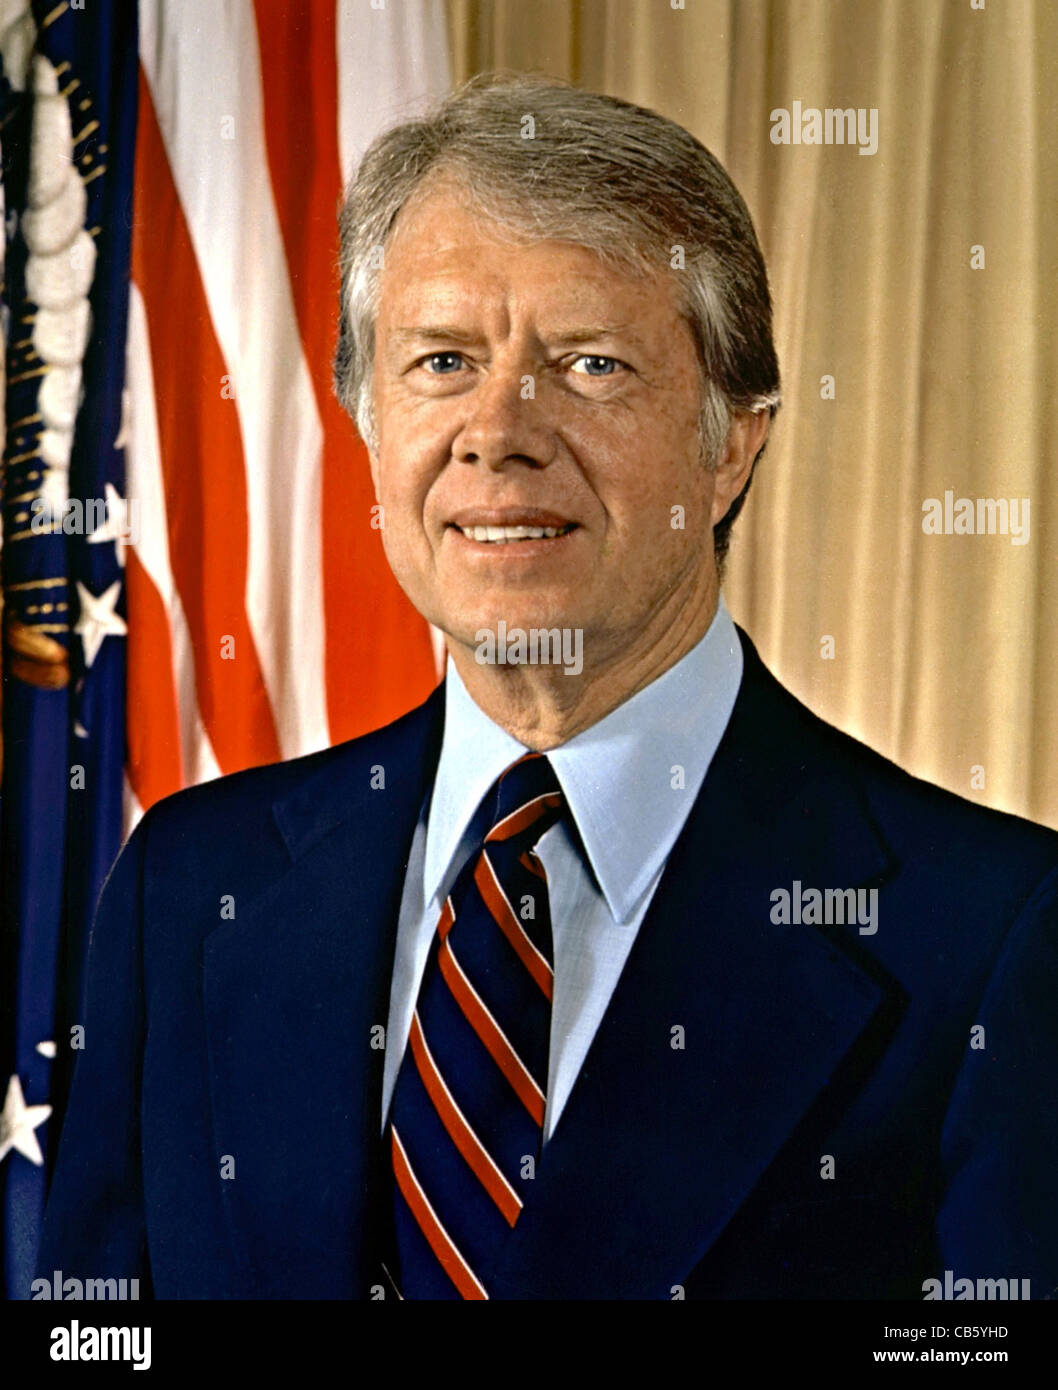 Portrait of Jimmy Carter, 39th president of the United States Stock Photo